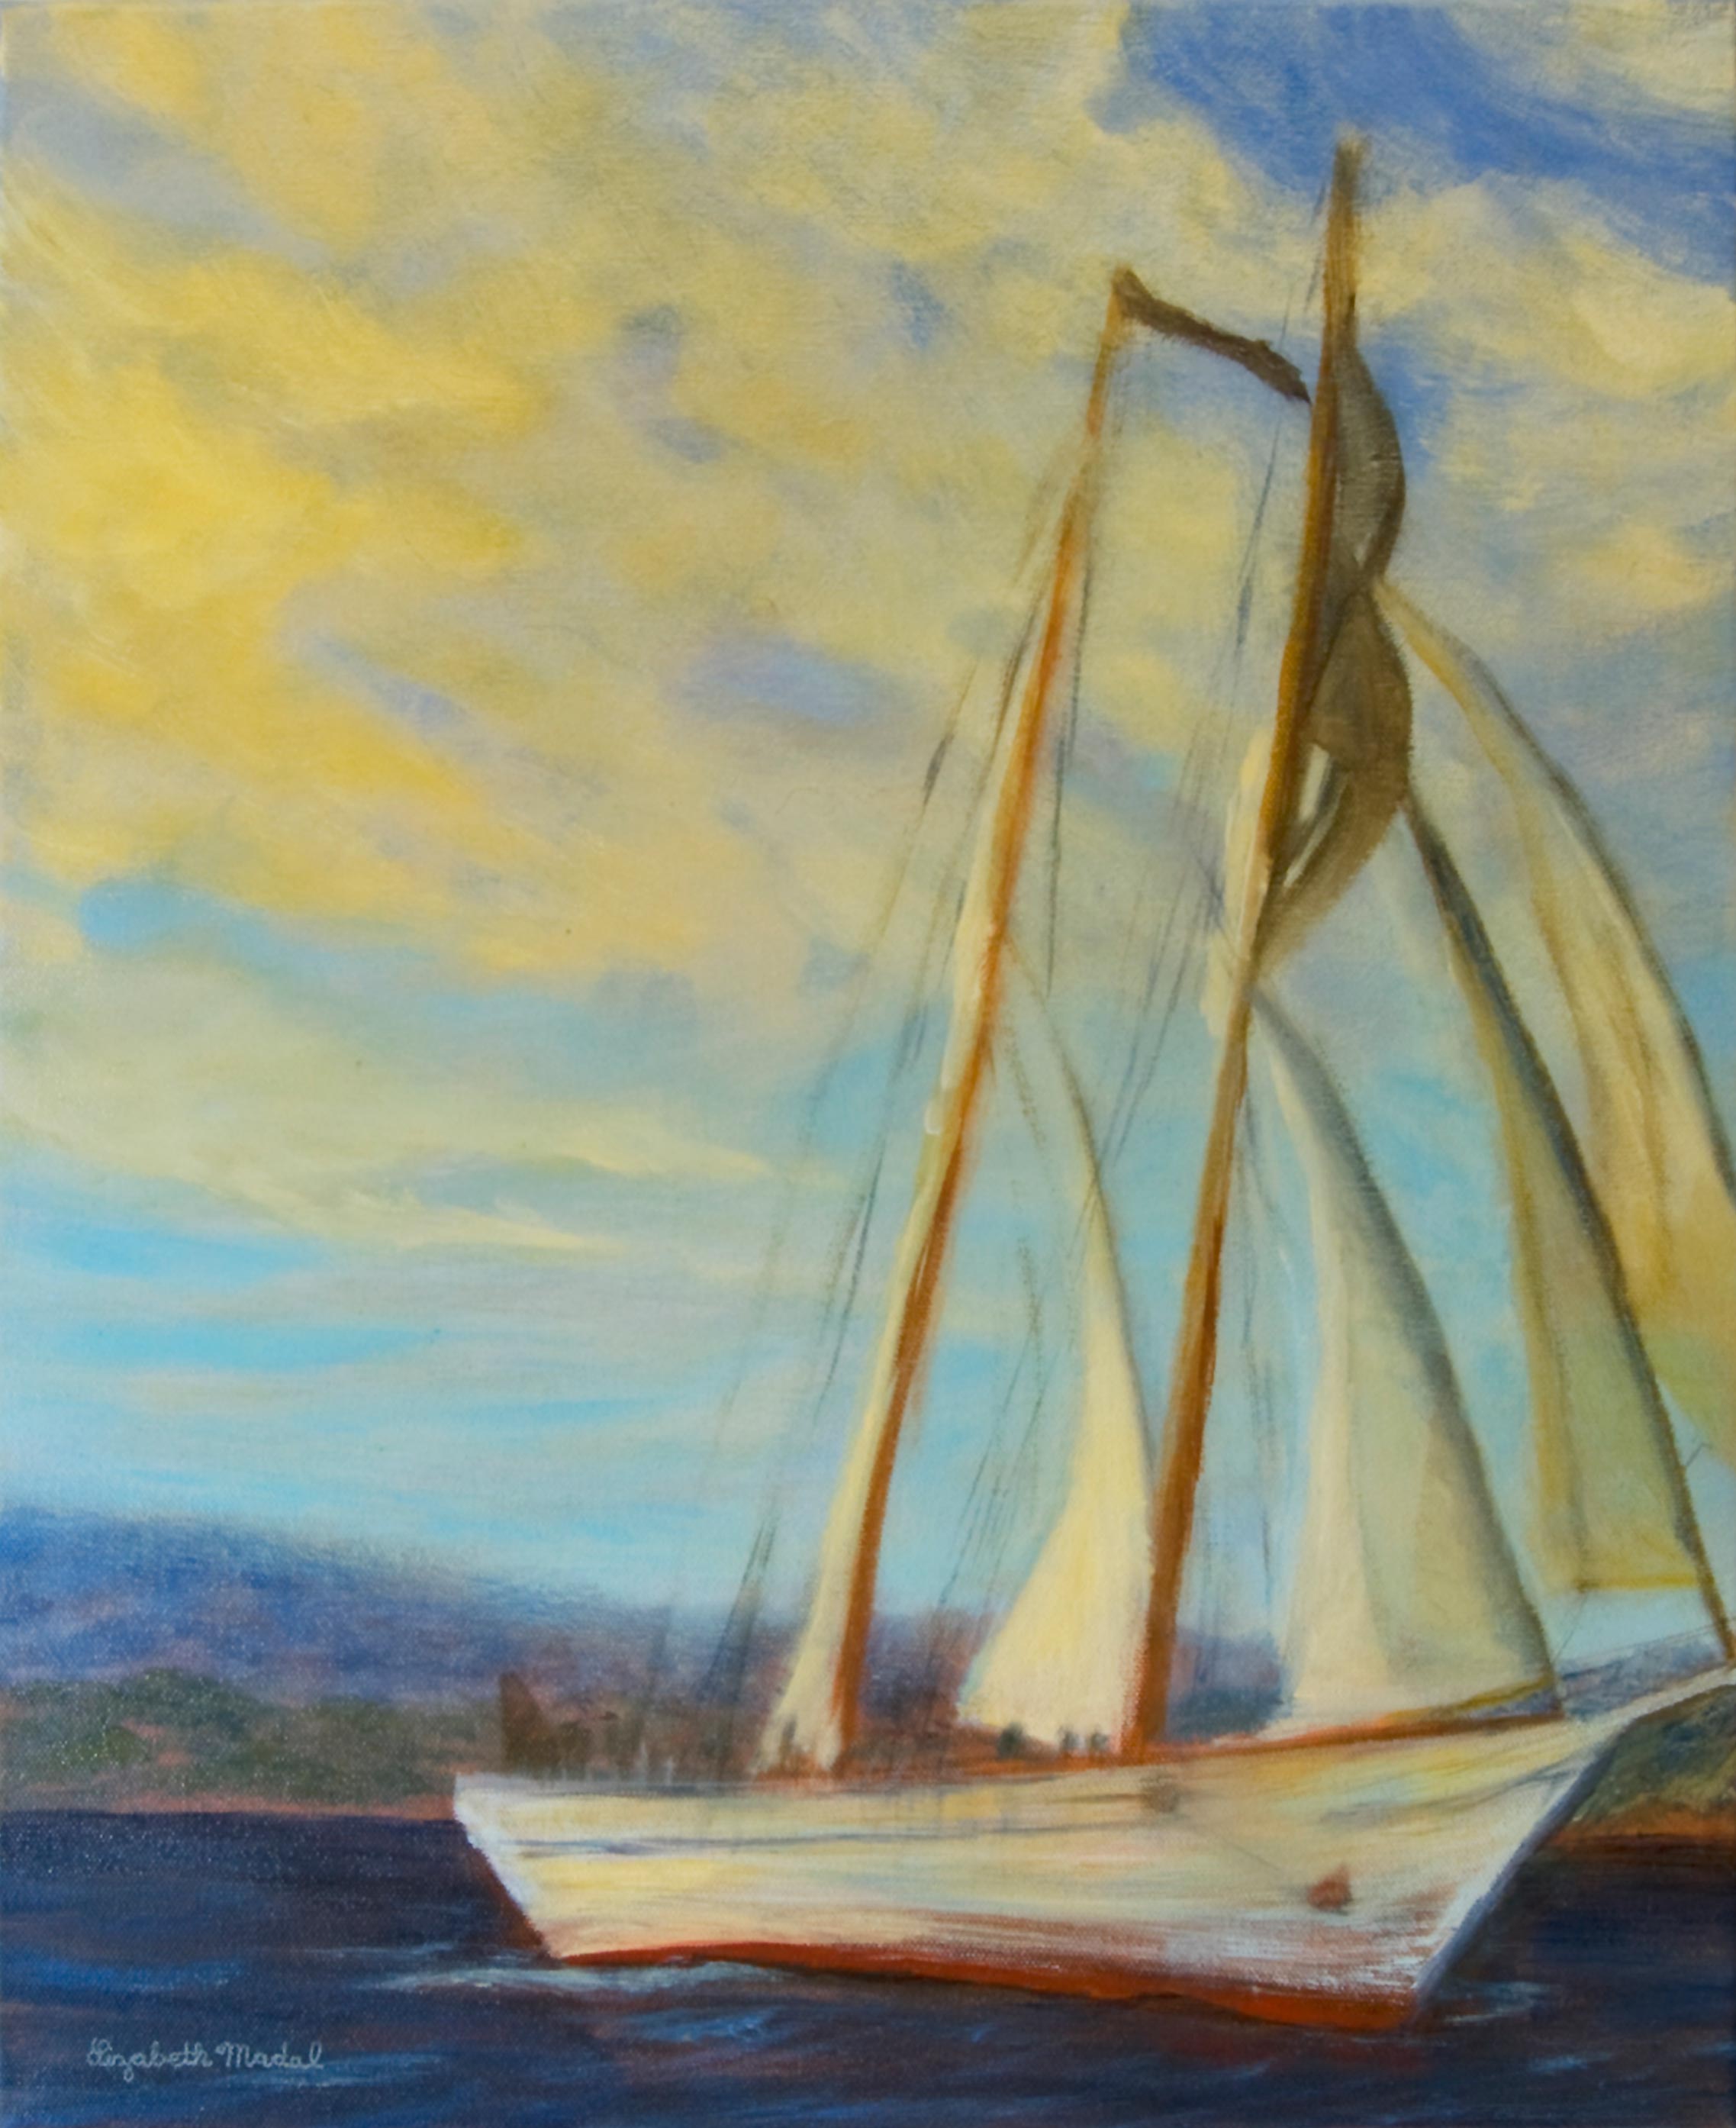 An oil painting of a red and white sailboat on the Pacific Ocean.